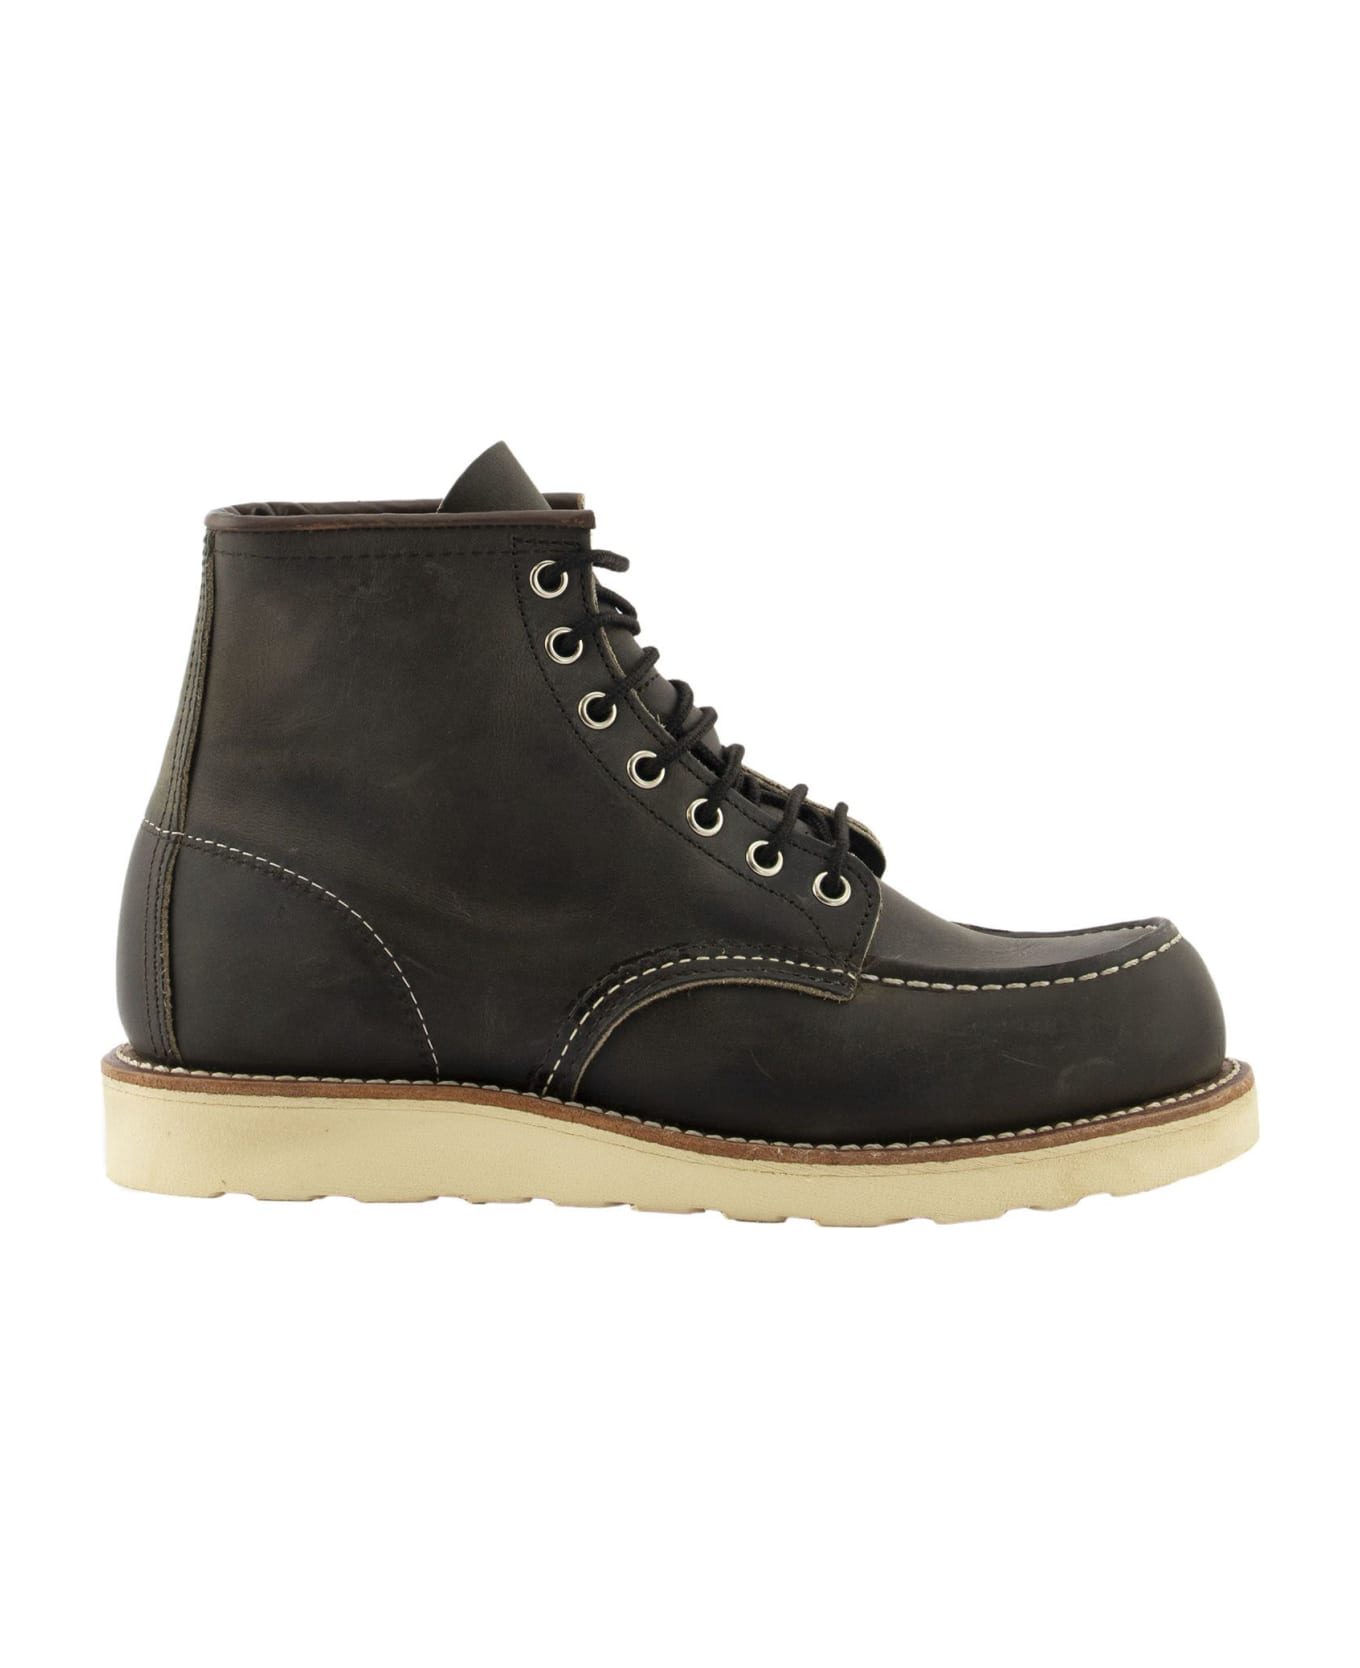 Red Wing Boot Charcoal - Charcoal ブーツ